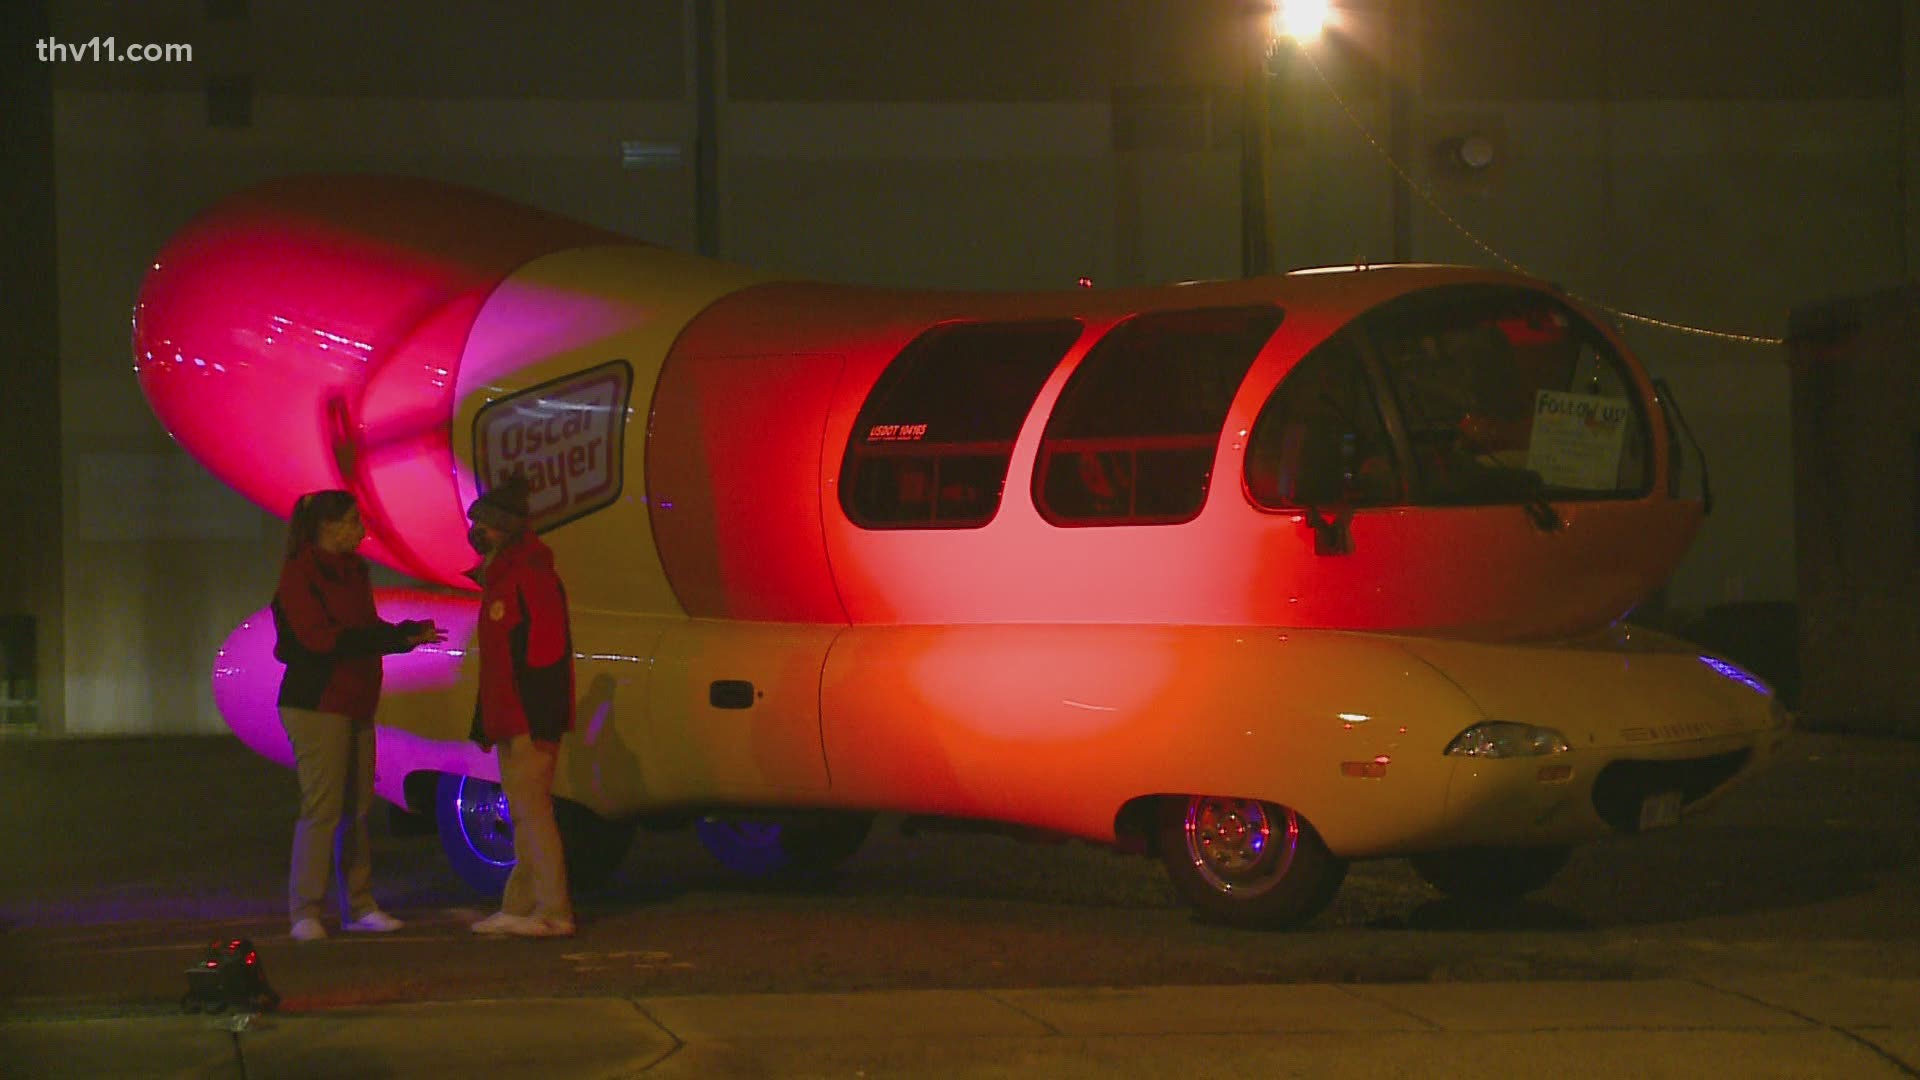 Just in time to celebrate Halloween, the famous Wienermobile is in town for some fun.